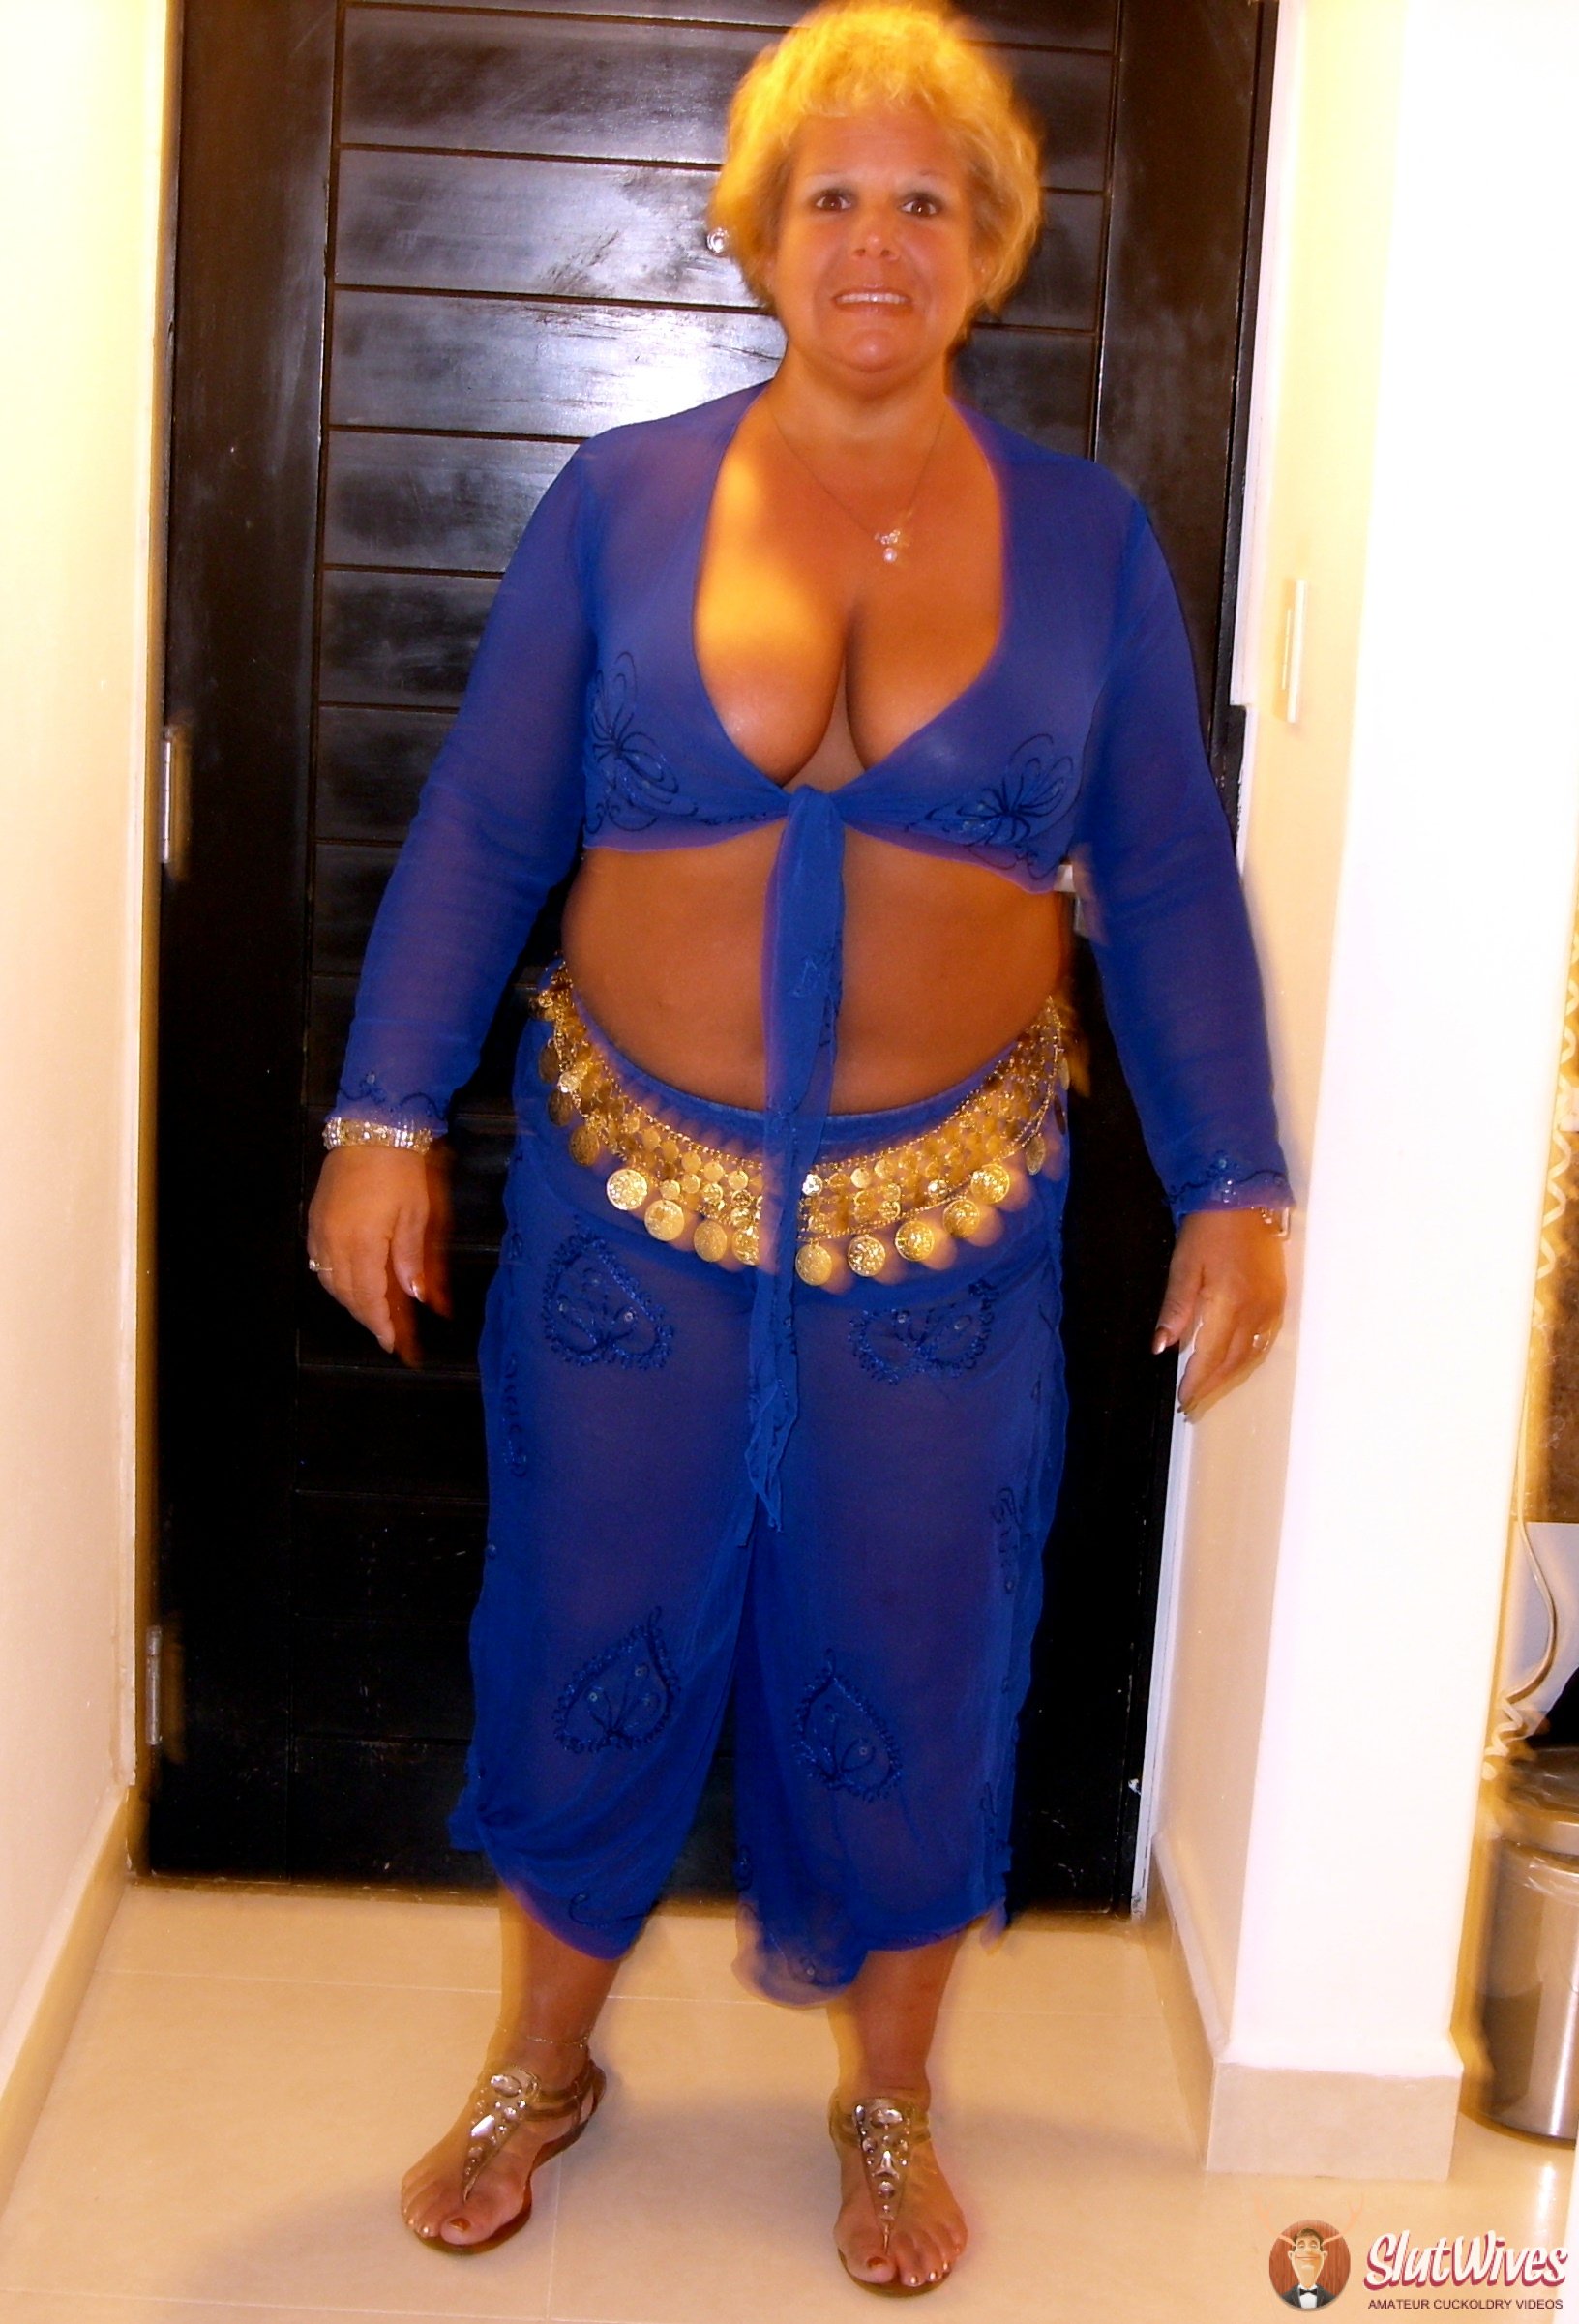 While hub was the sultan of swing I wore a sheer harem costume...